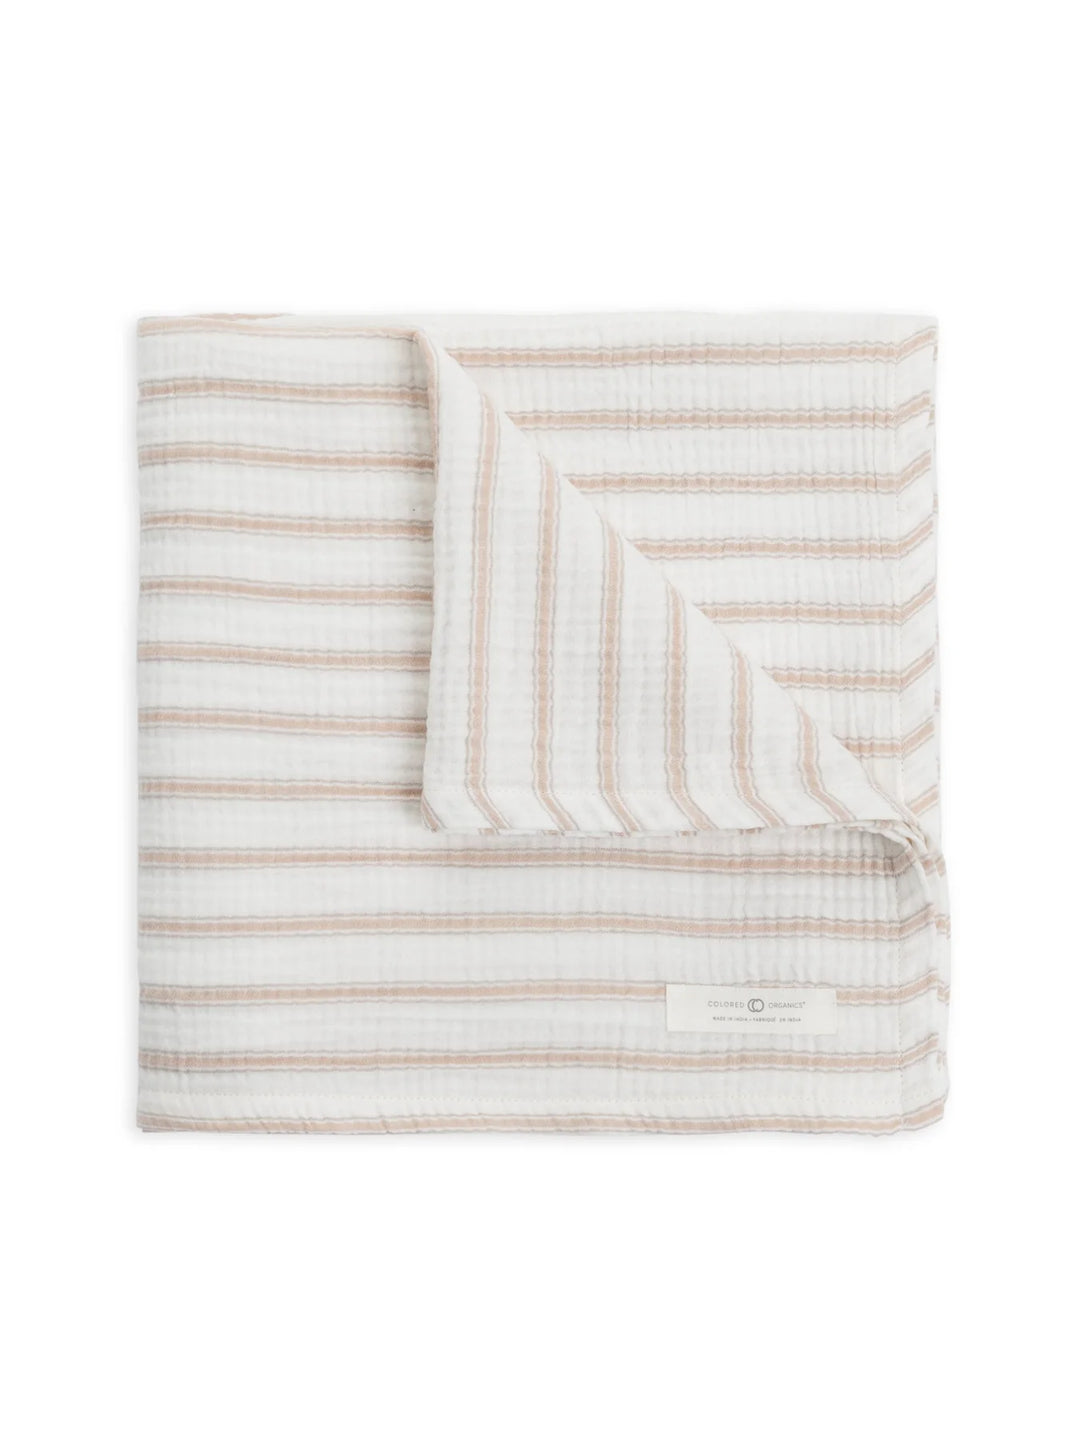 Organic Cotton Swaddle Blanket in a Variety of Colors